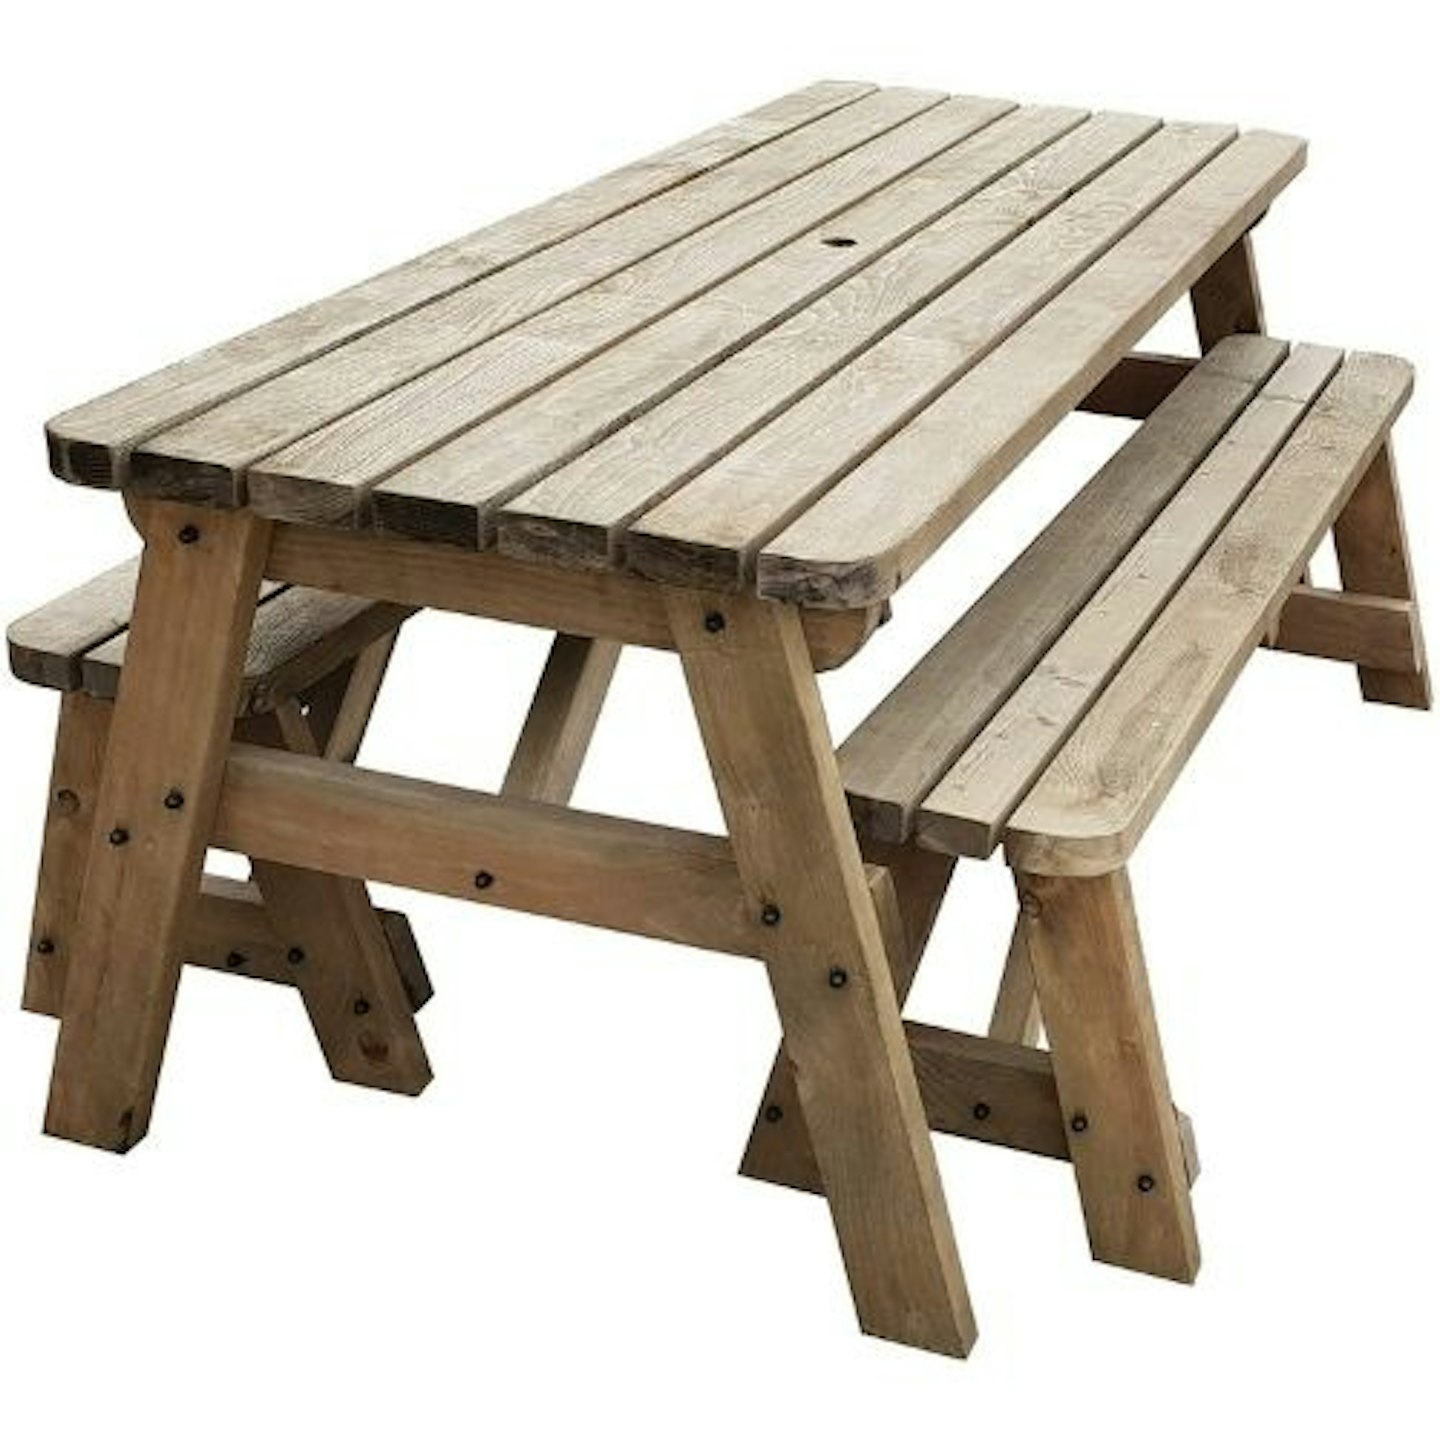 Victoria Compact Wooden Picnic Table and Benches Set